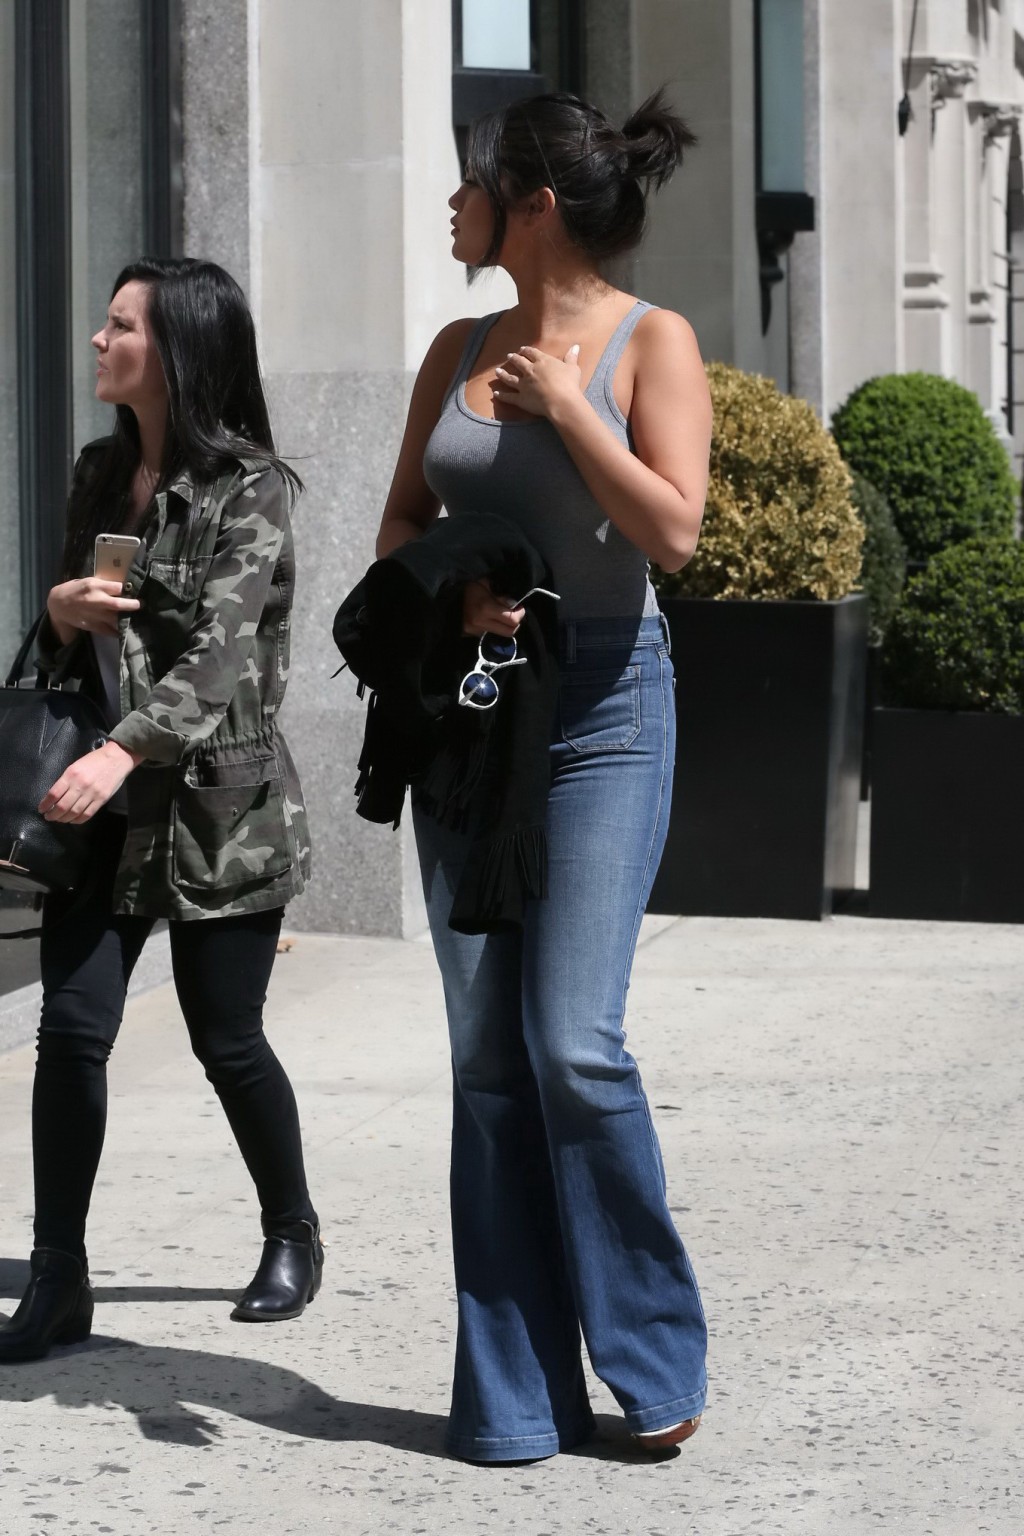 Selena Gomez busty wearing skimpy gray top and jeans out in NYC #75165050